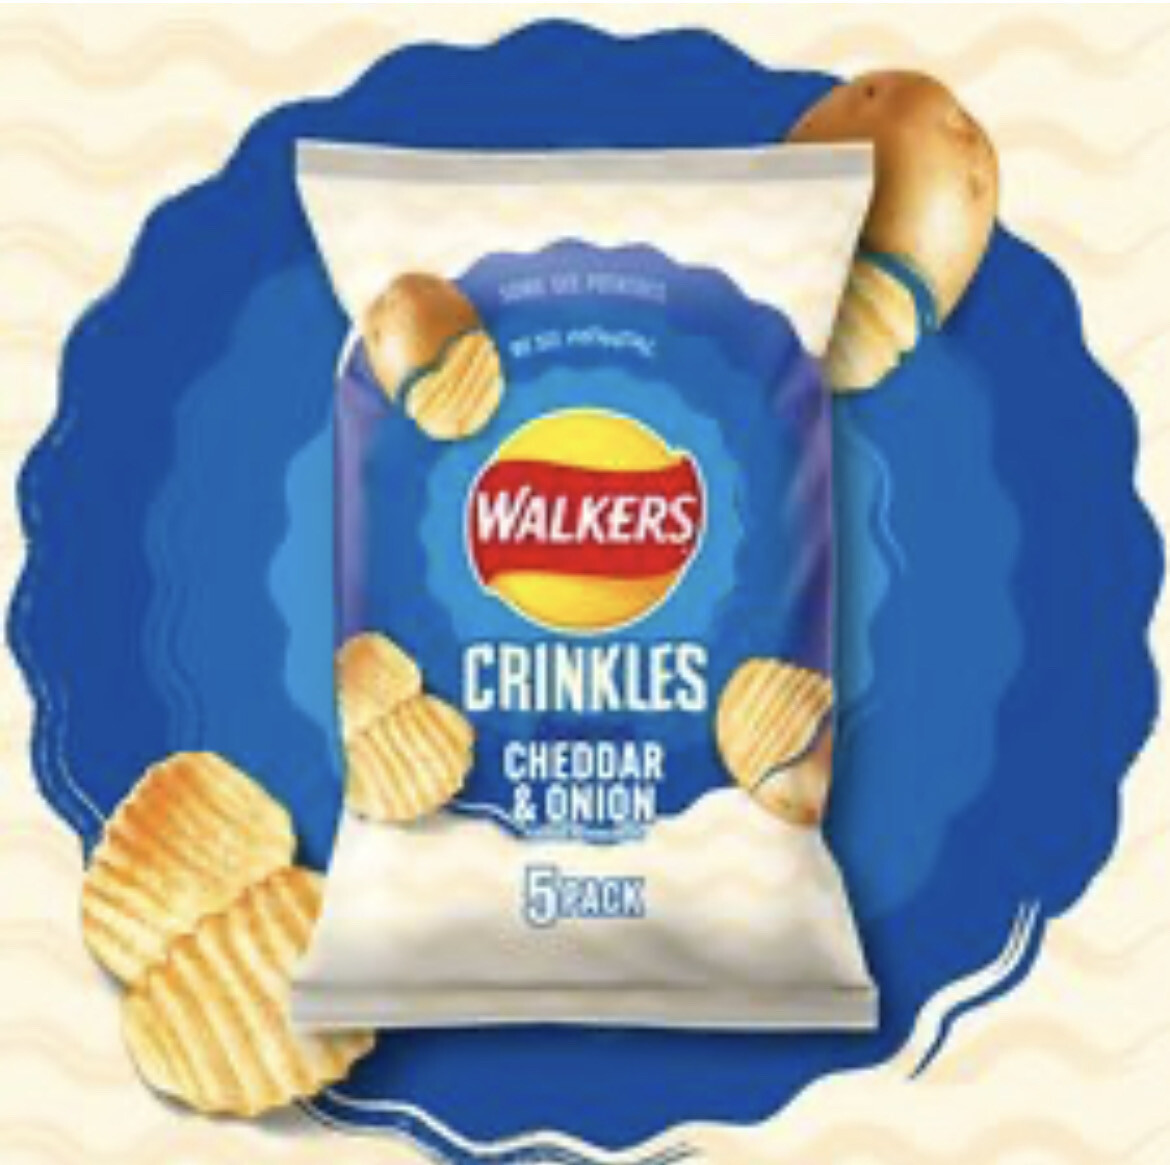 Walkers Crinkles Cheese & Onion 5pkBBE-11/23